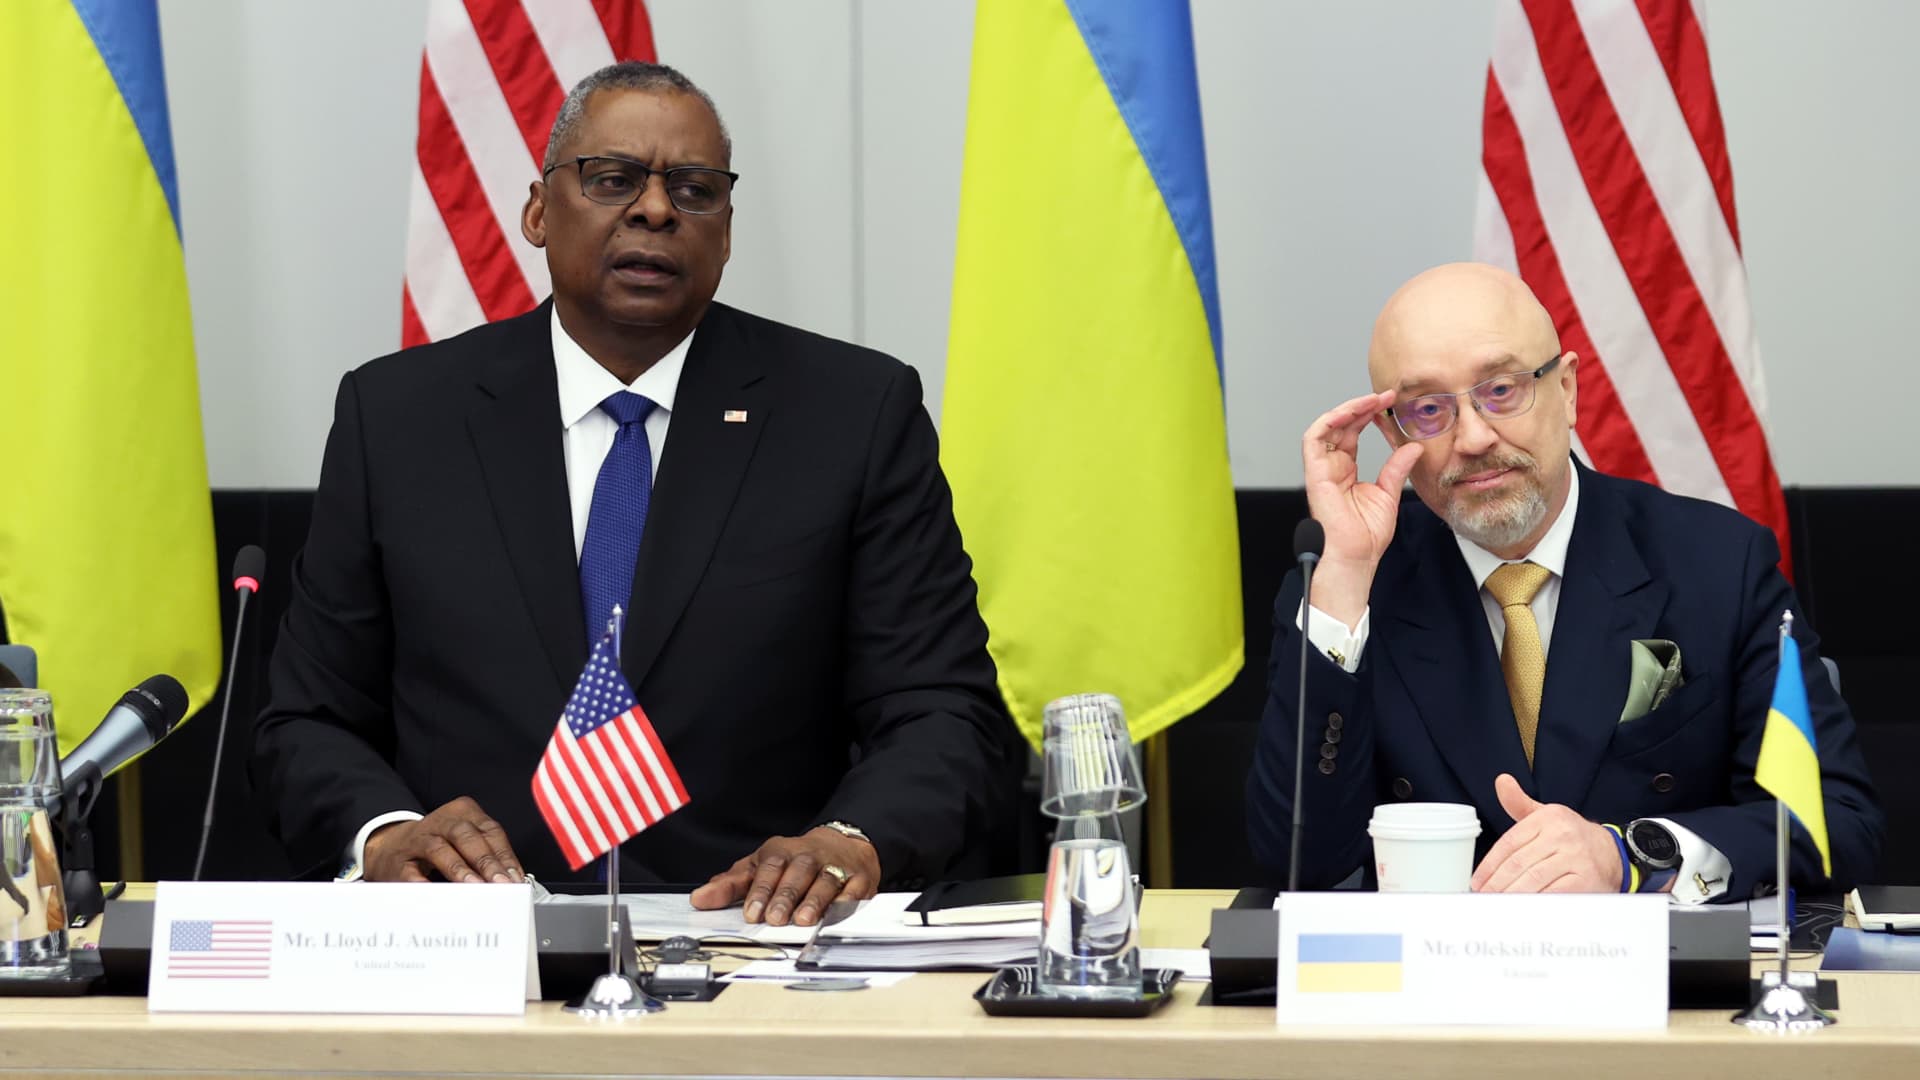 US Defence Secretary Lloyd J. Austin III (L) and Ukrainian Defence Minister Oleksii Reznikov (R) attend the Ukraine defence contact group meeting at NATO headquarters during the first of two days of defence ministers' meetings on February 14, 2023 in Brussels, Belgium.